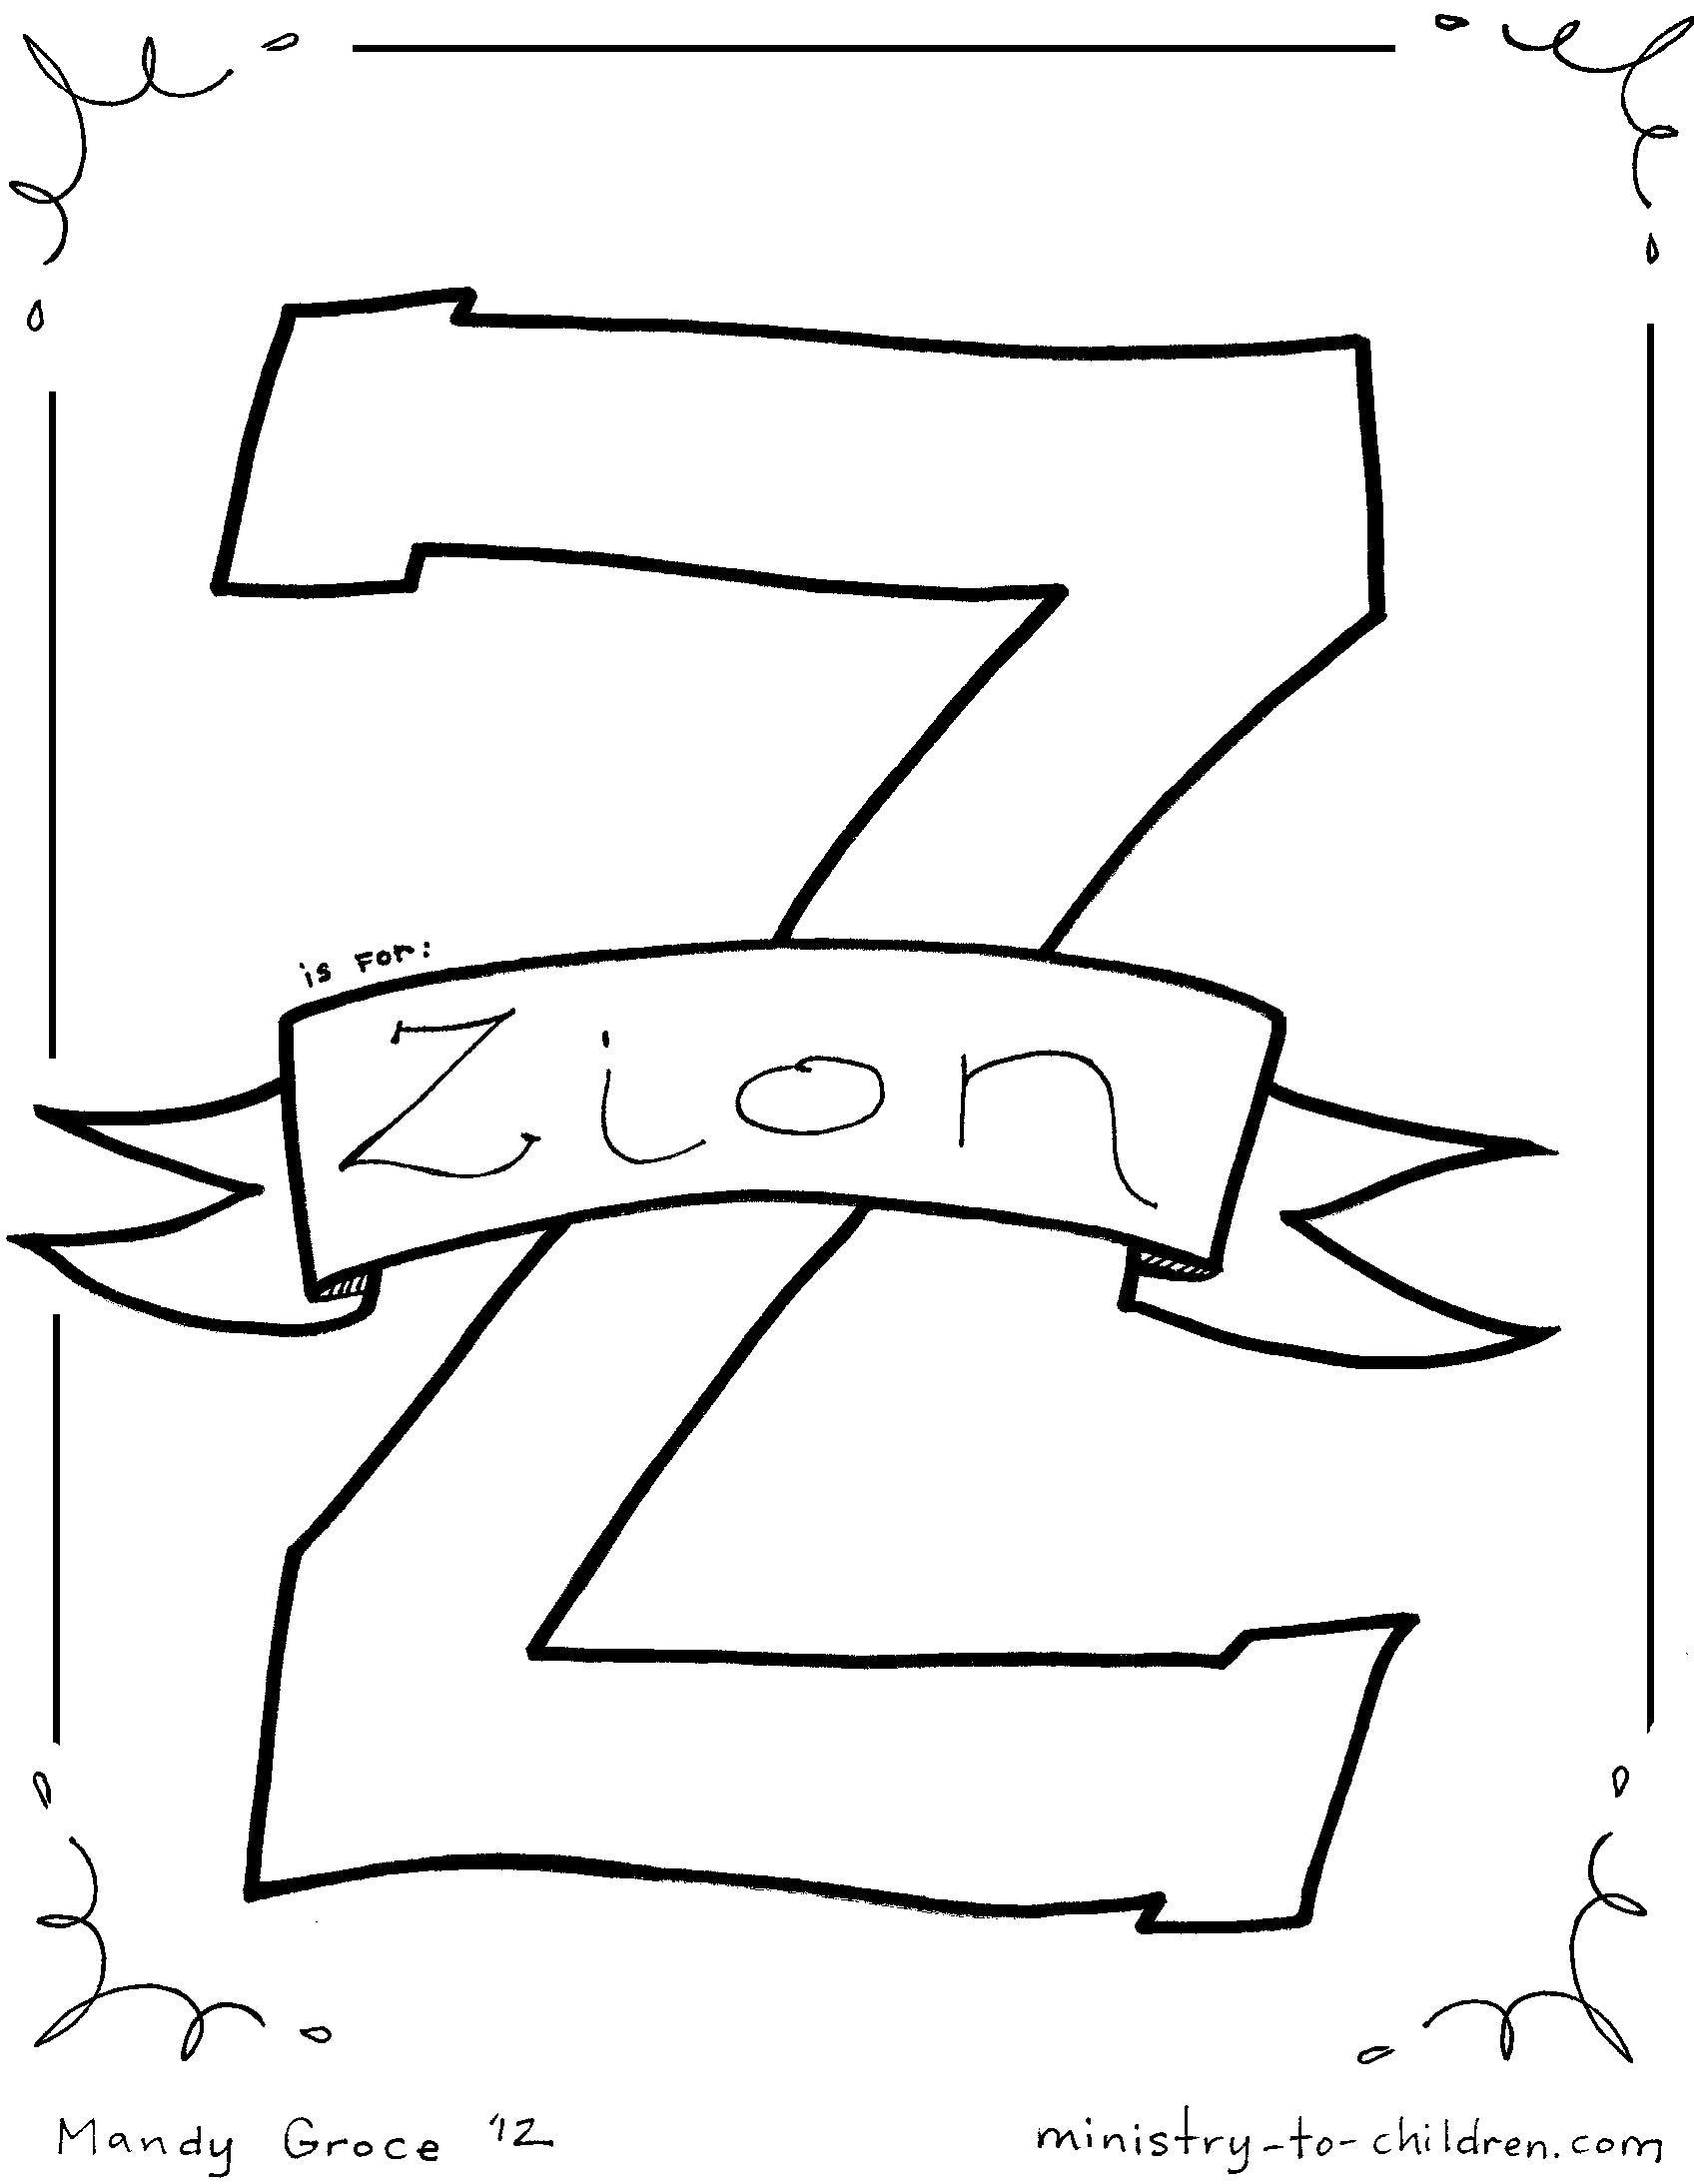 number 12 coloring page